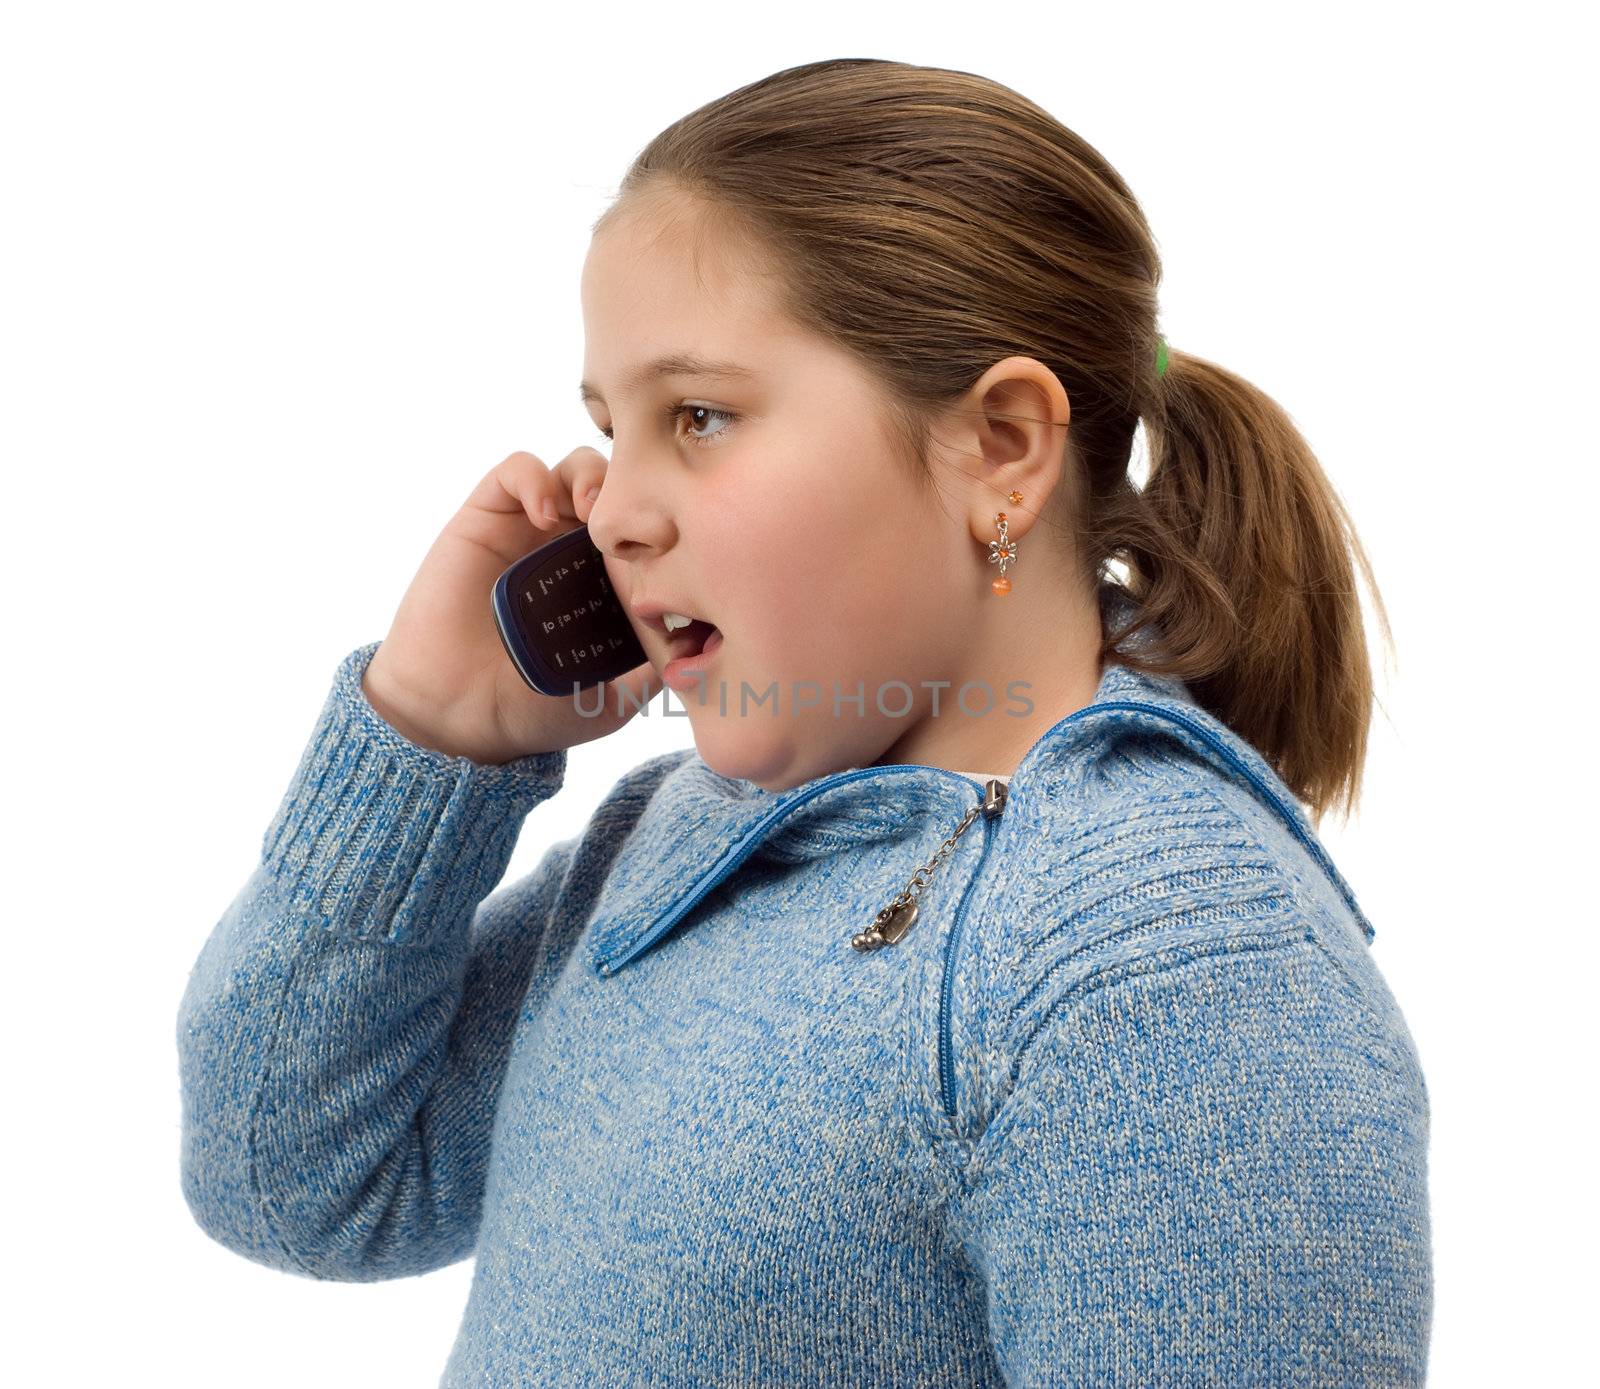 A young girl talking on a cell phone, isolated against a white background